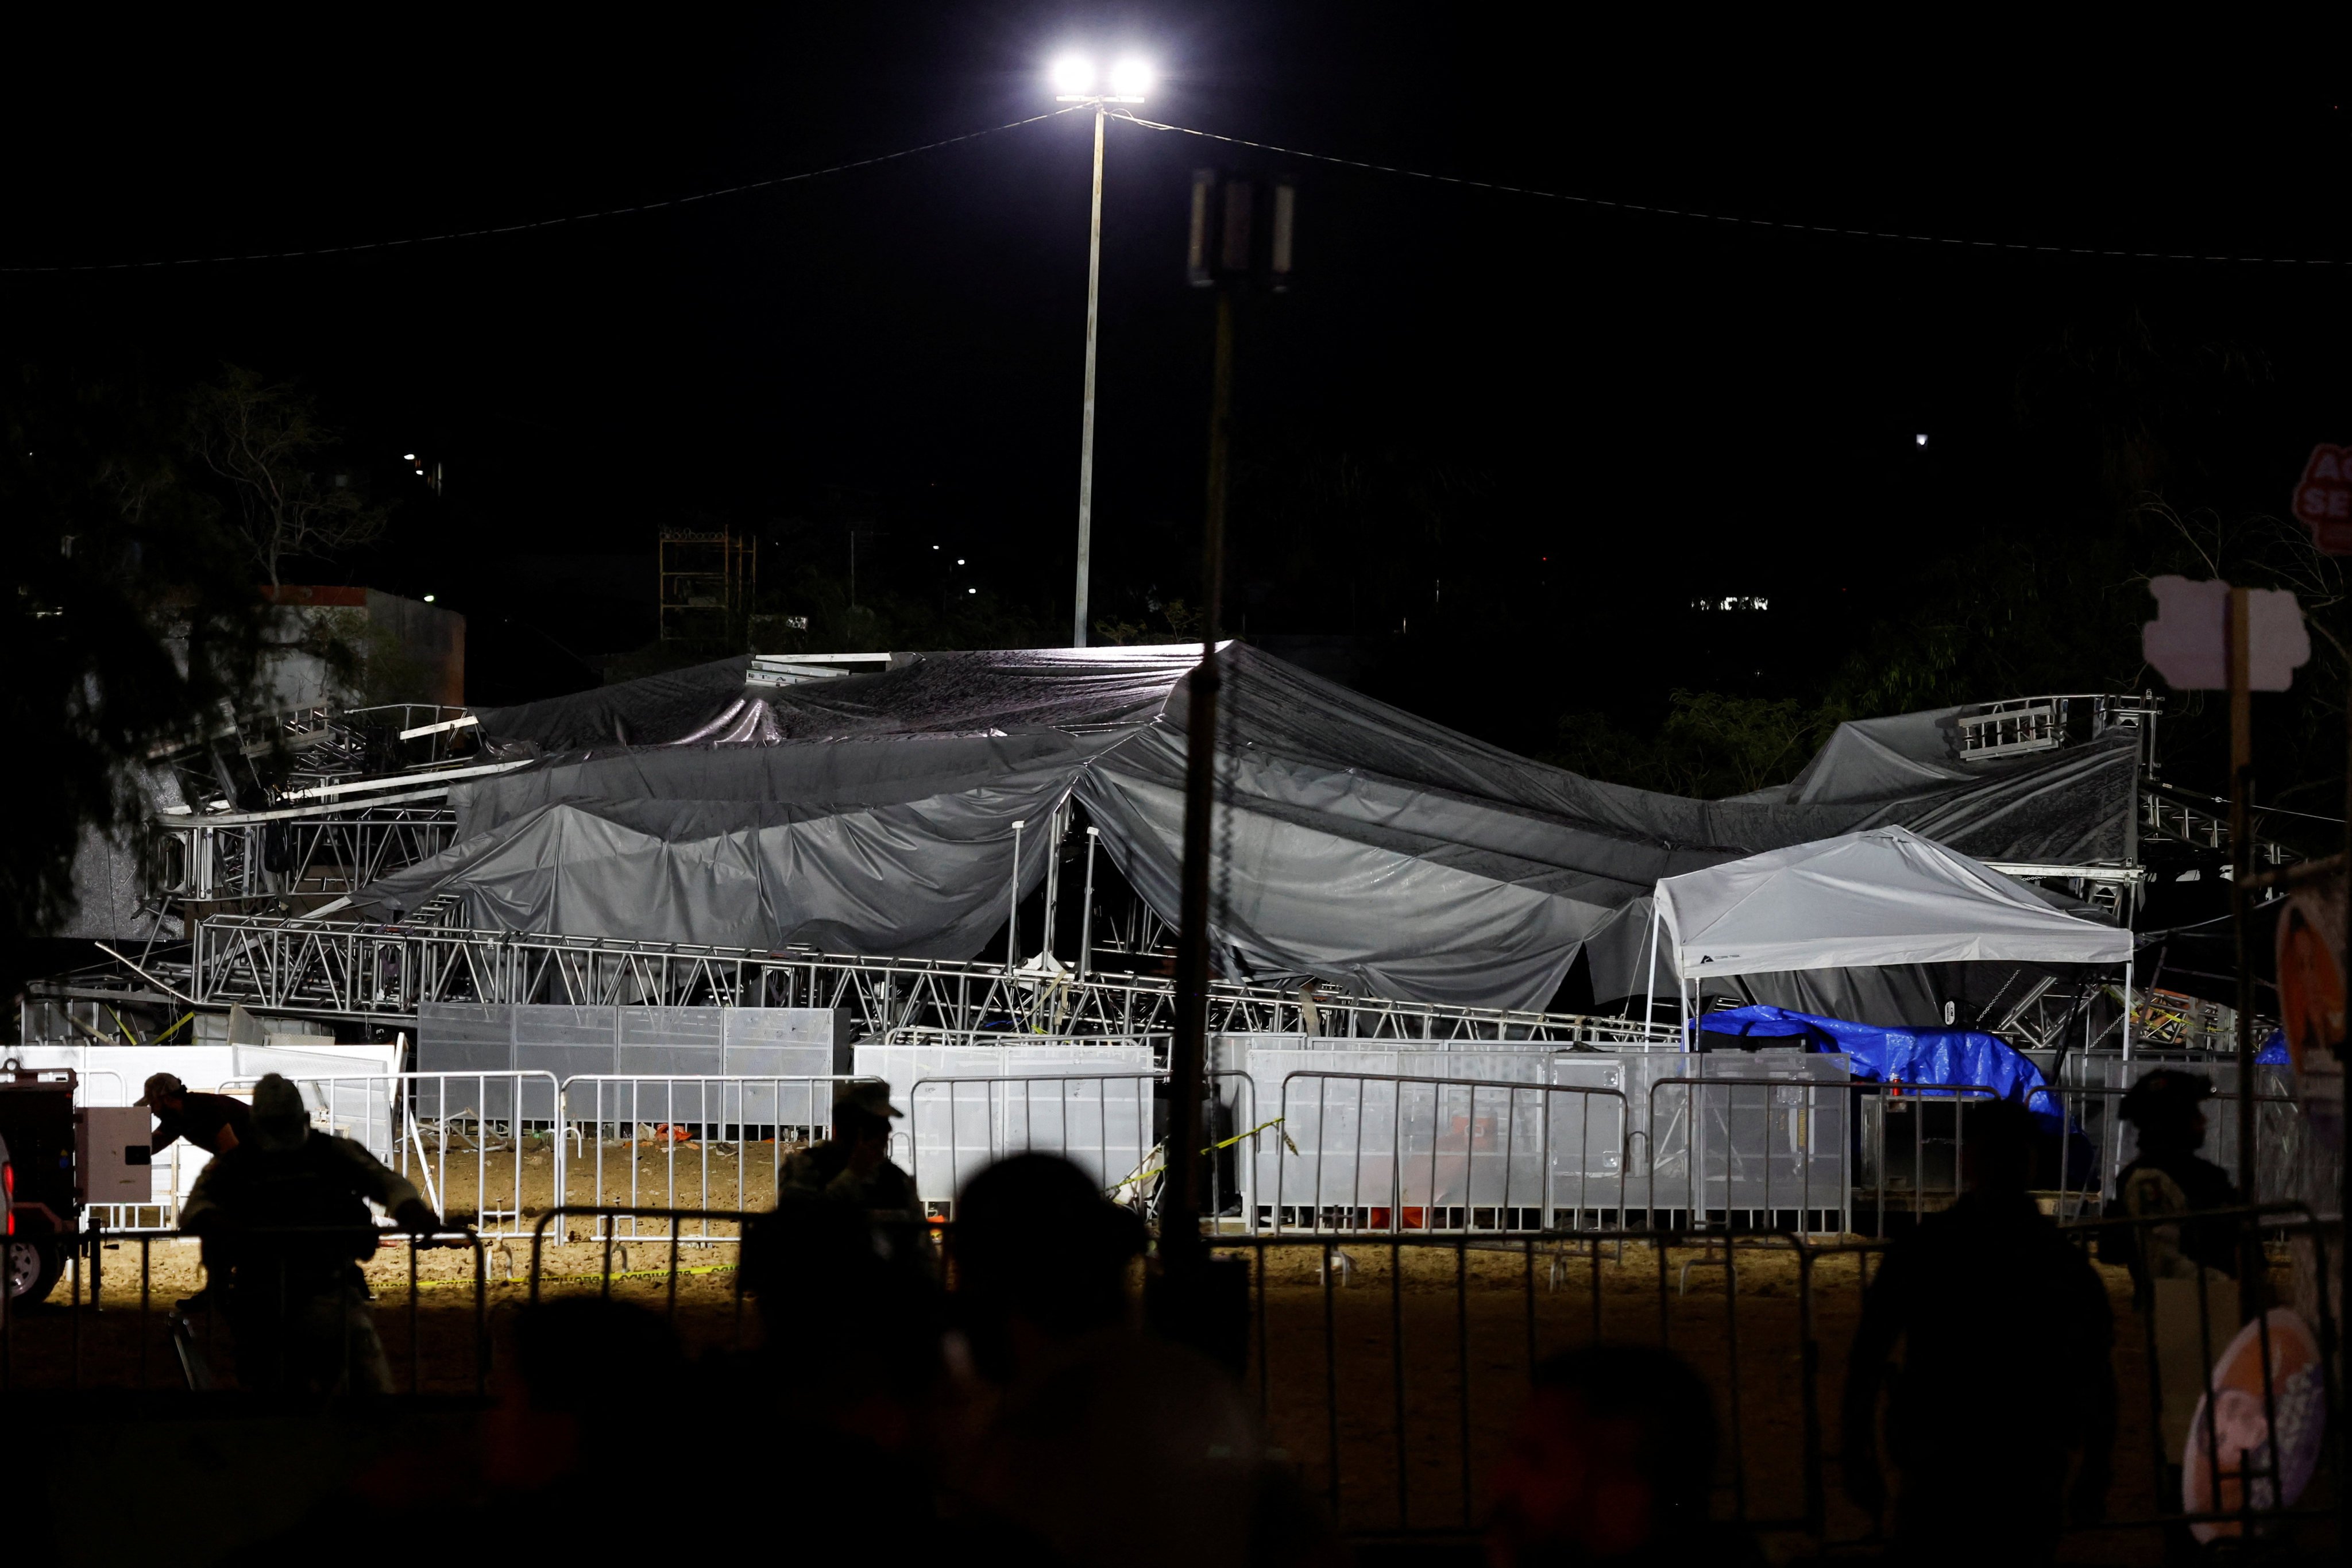 Part of the structure that collapsed at the campaign event. Photo: Reuters